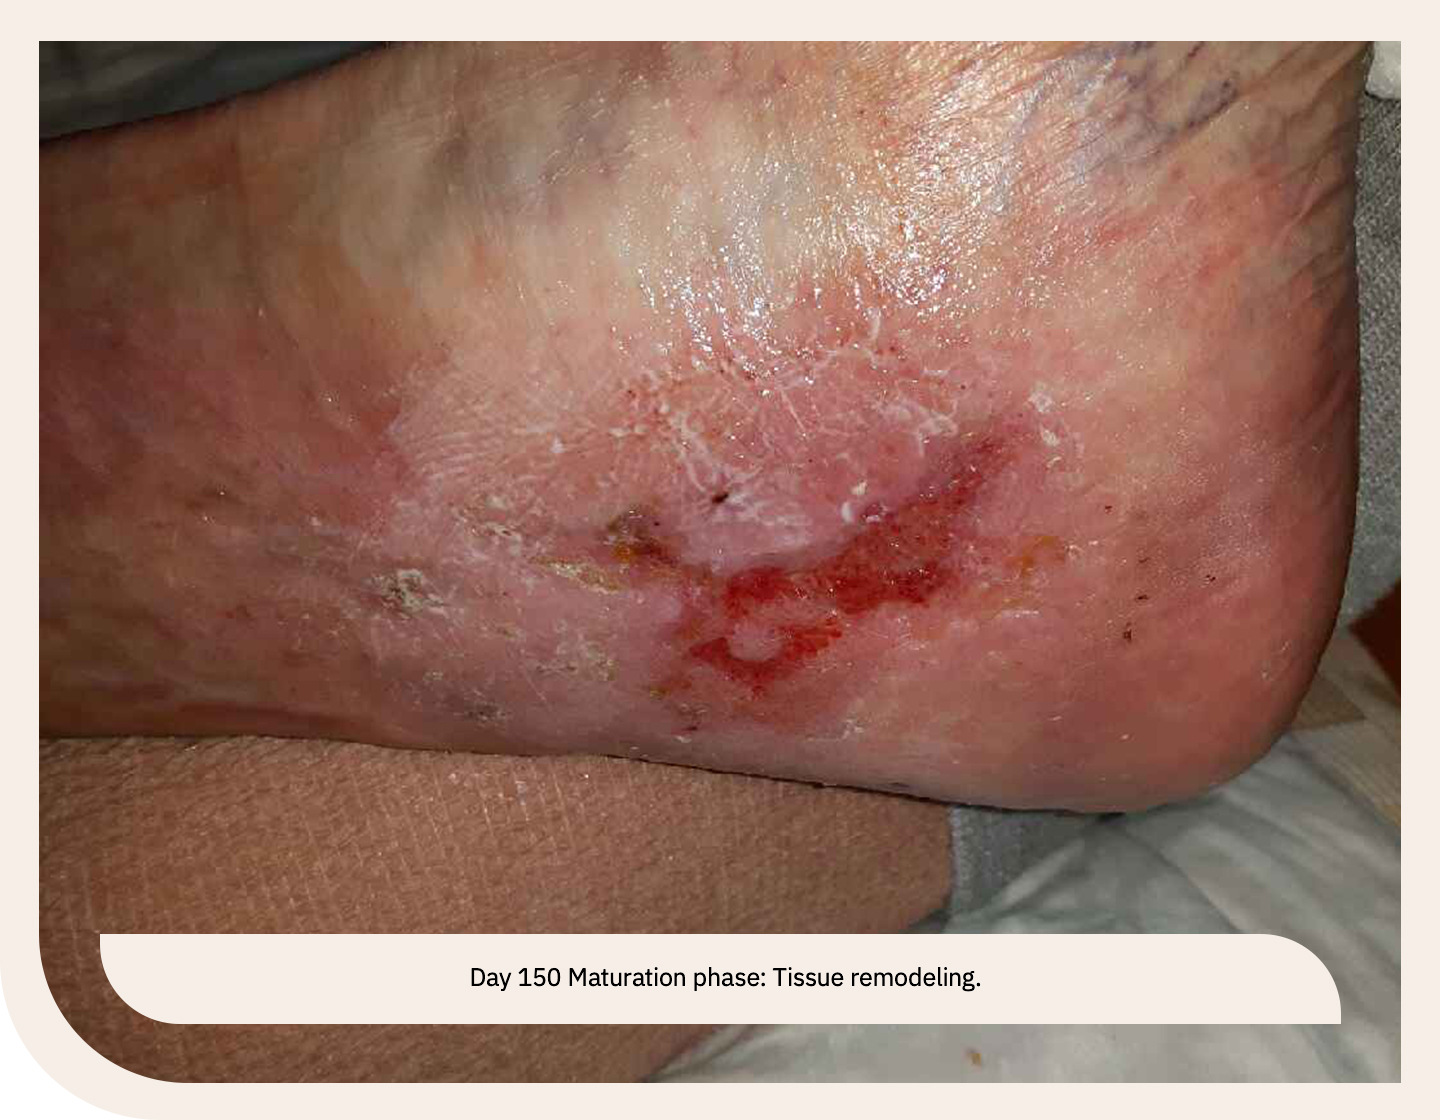 leg ulcer wound in maturation phase